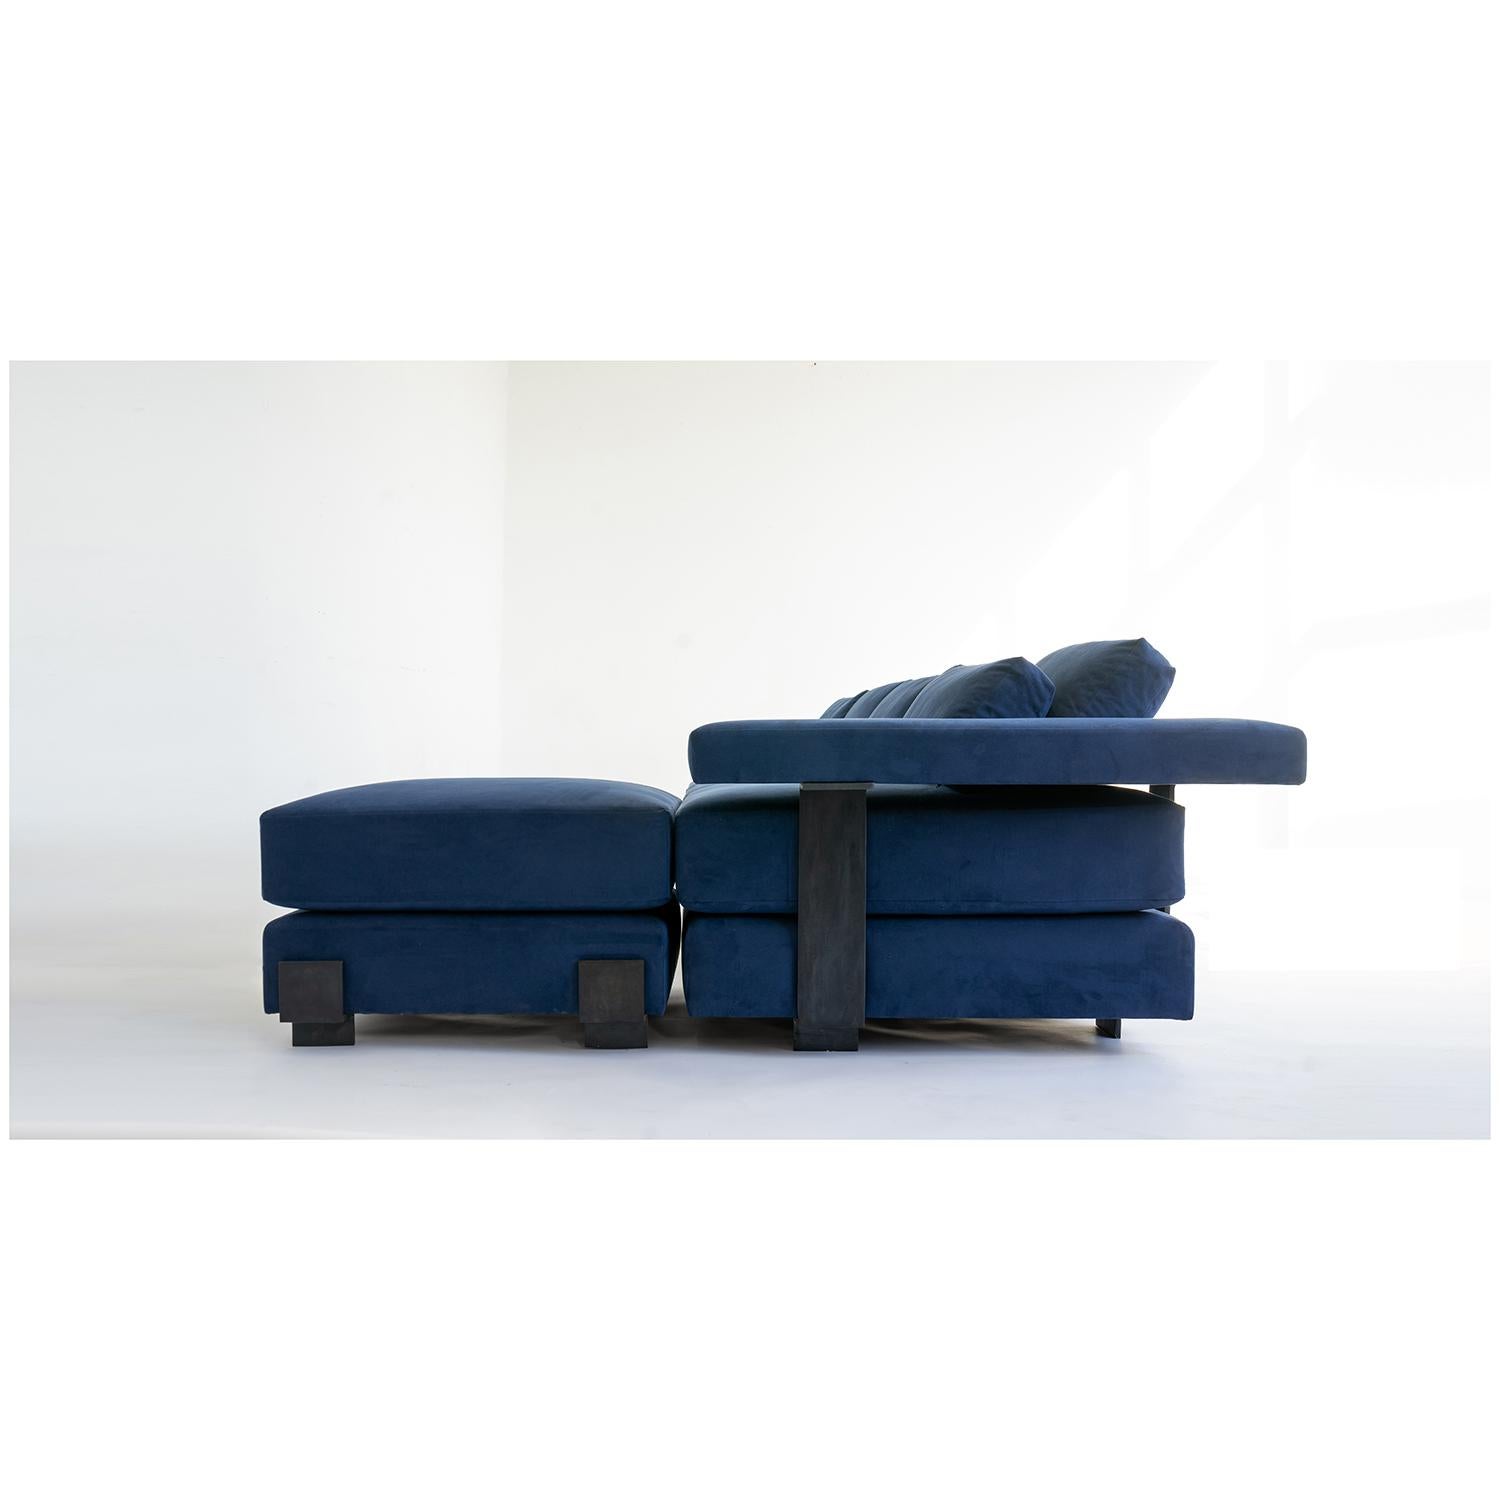 SOFA NO. 1 AND OTTOMAN SET
J.M. Szymanski
d. 2020

Hand-carved steel details integrated into a modern take on a sectional sofa. 

Pricing may vary on filling and fabric. Pricing based on COM. Custom sizes and fabrics available.

Our products are